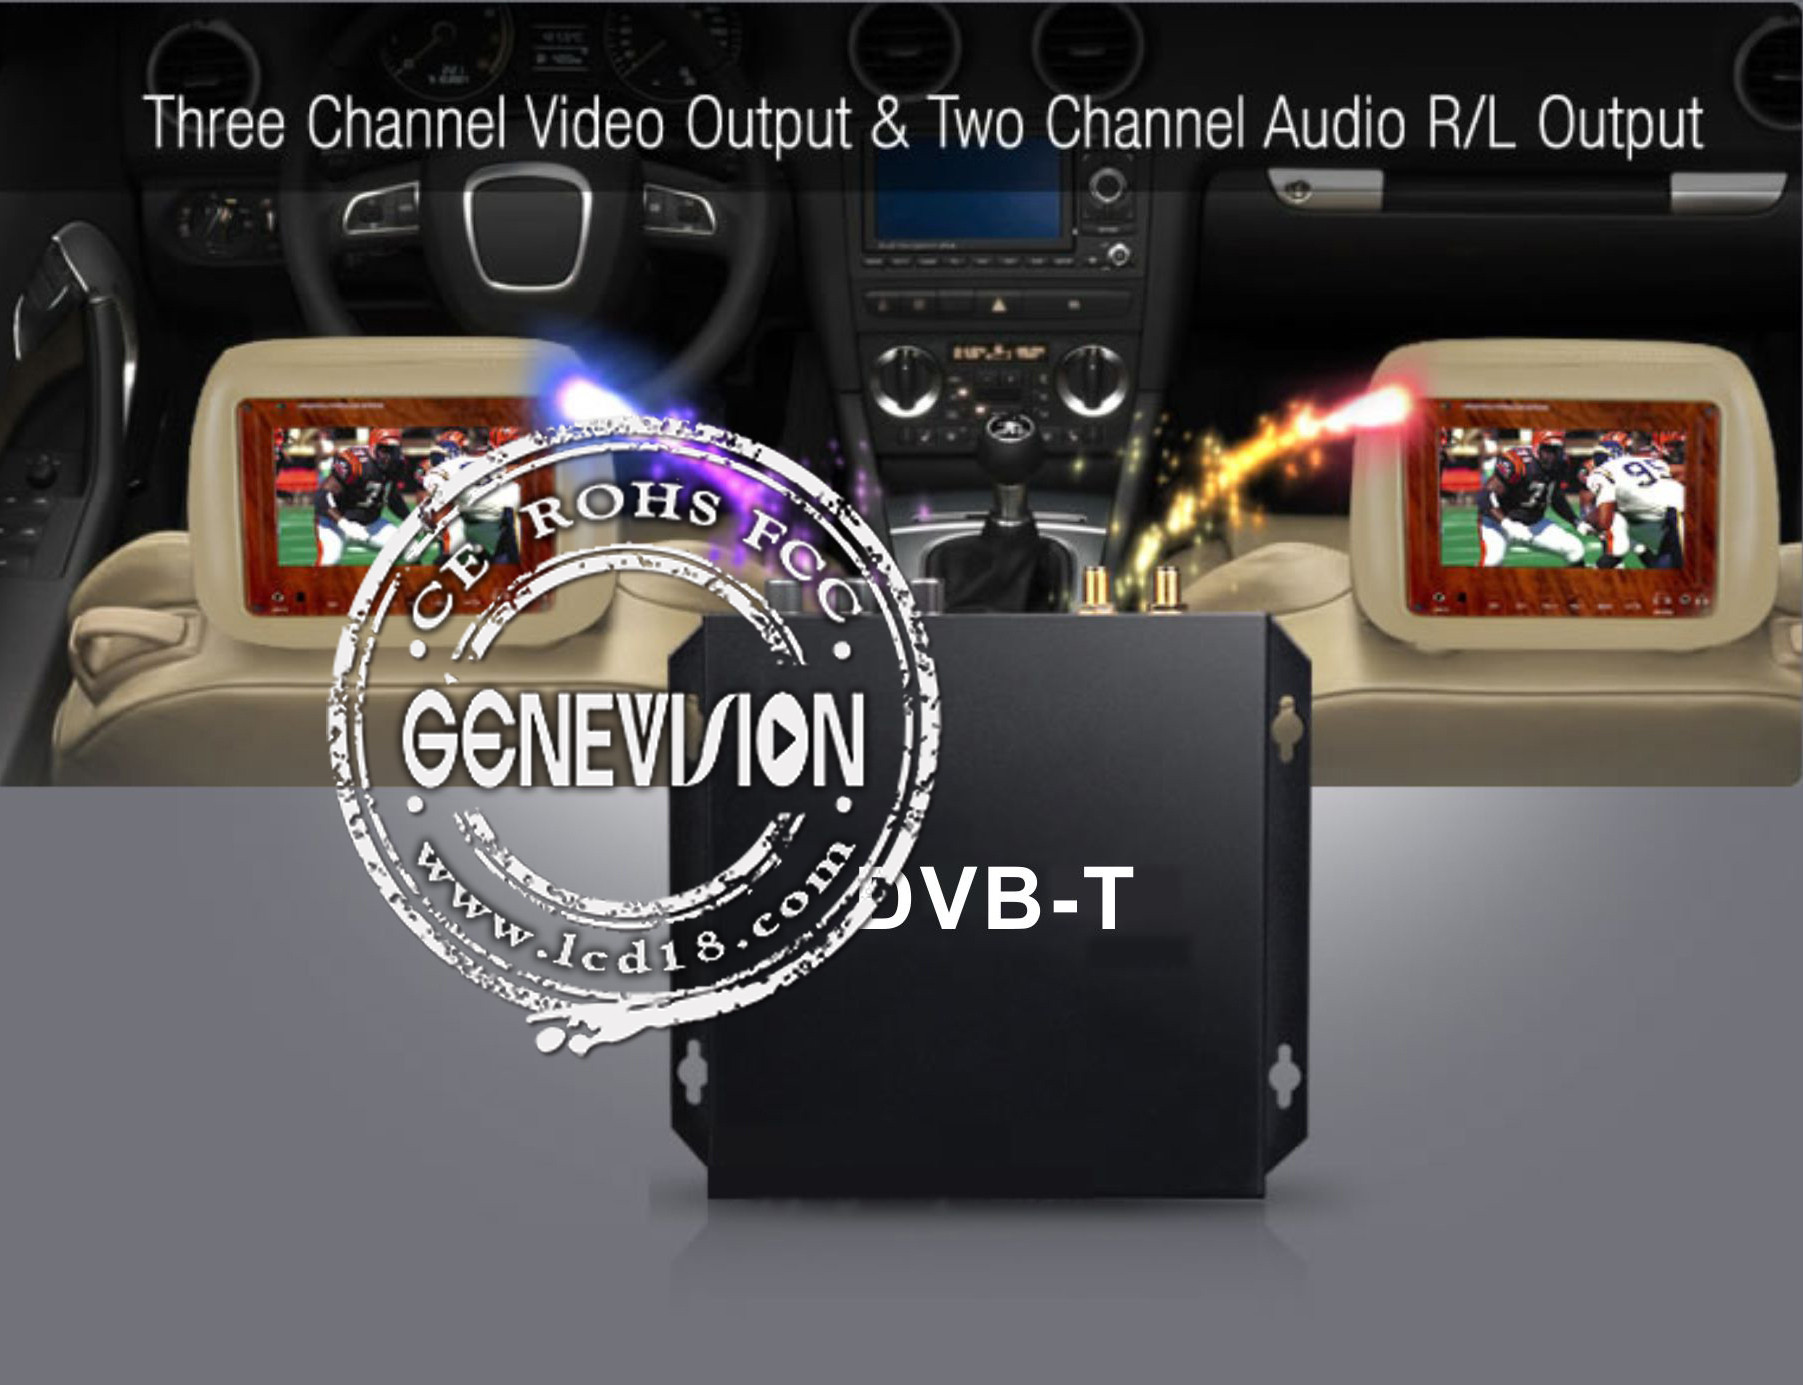 China HD DVB - T Car Digital TV Receiver with 2 Dibcom tuners active amplified antenna on sale